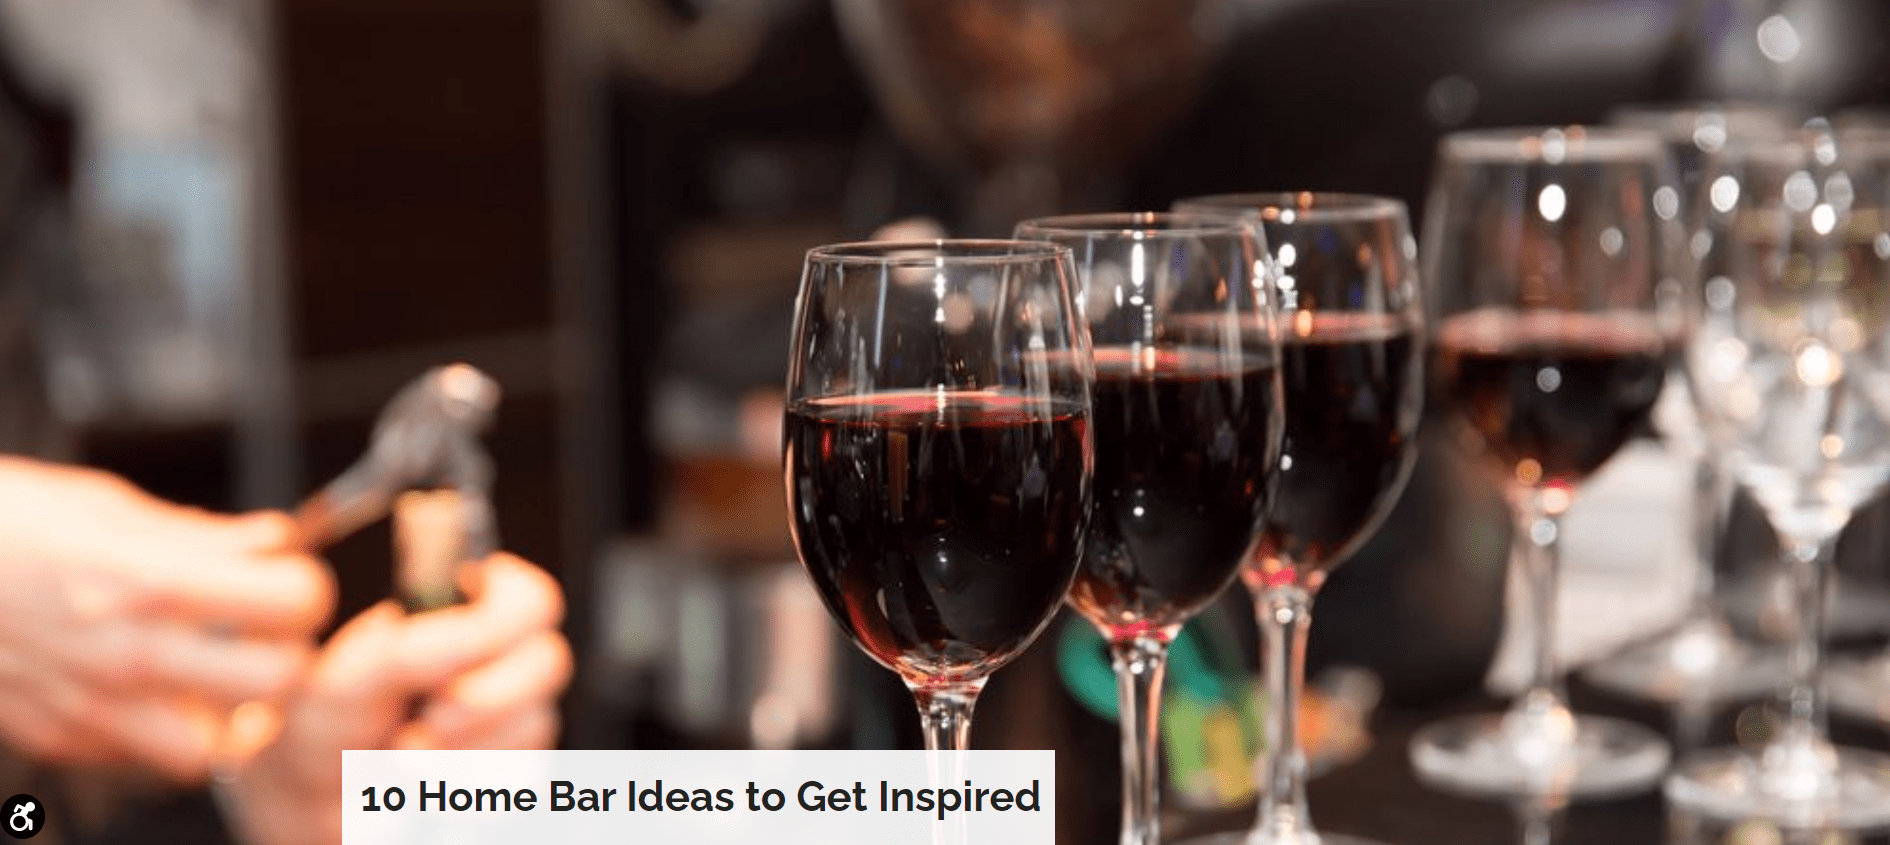 10 Home Bar Ideas to Get Inspired